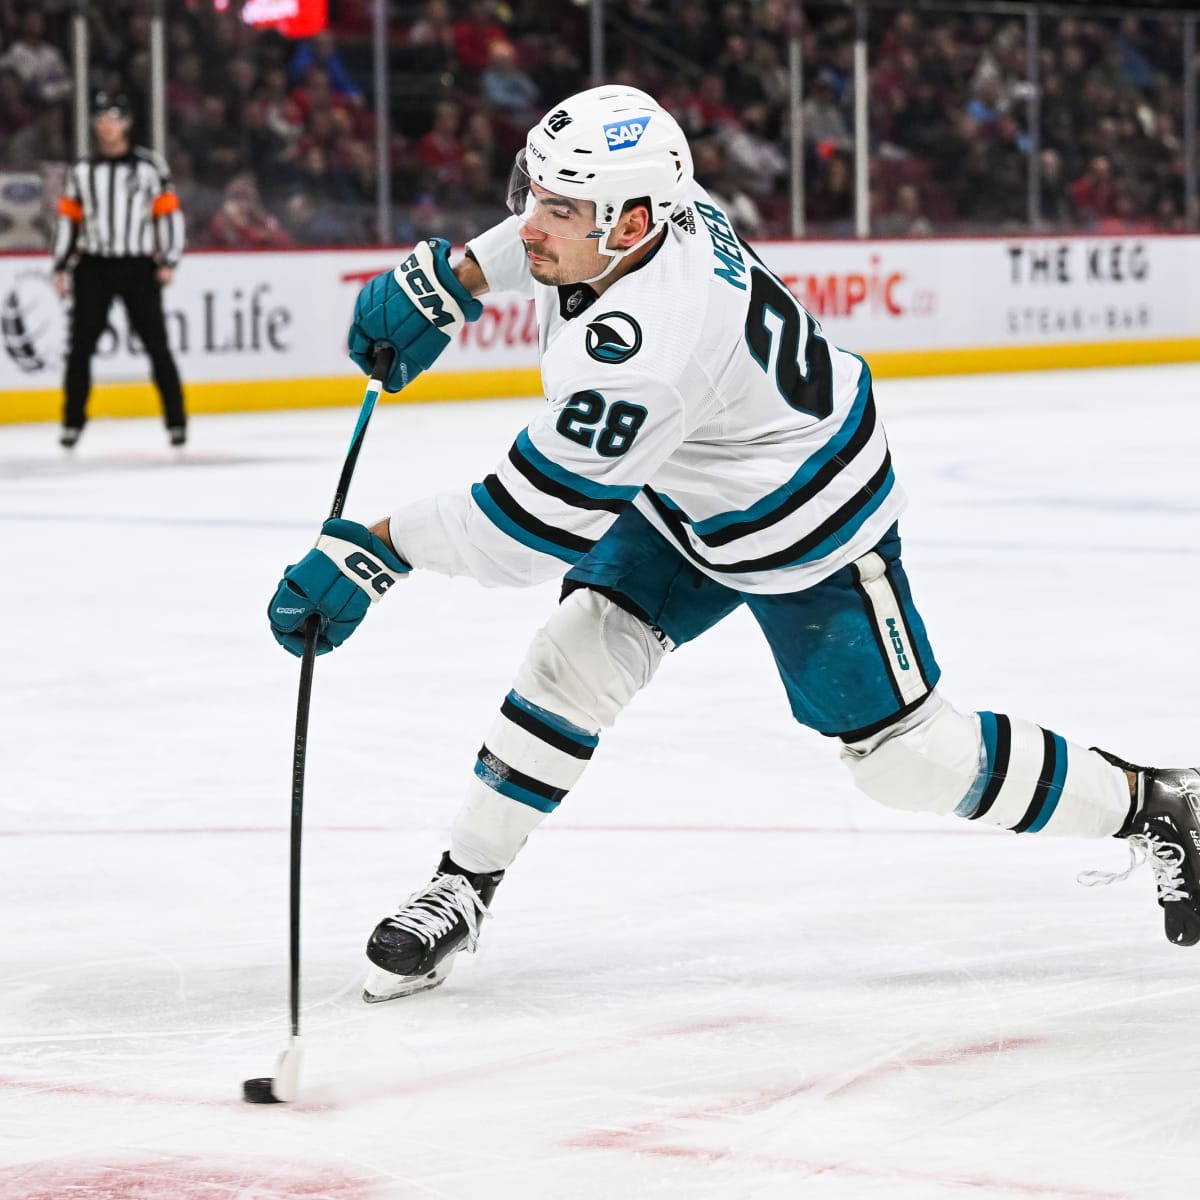 If the Sharks trade Timo Meier, which teams are the best potential